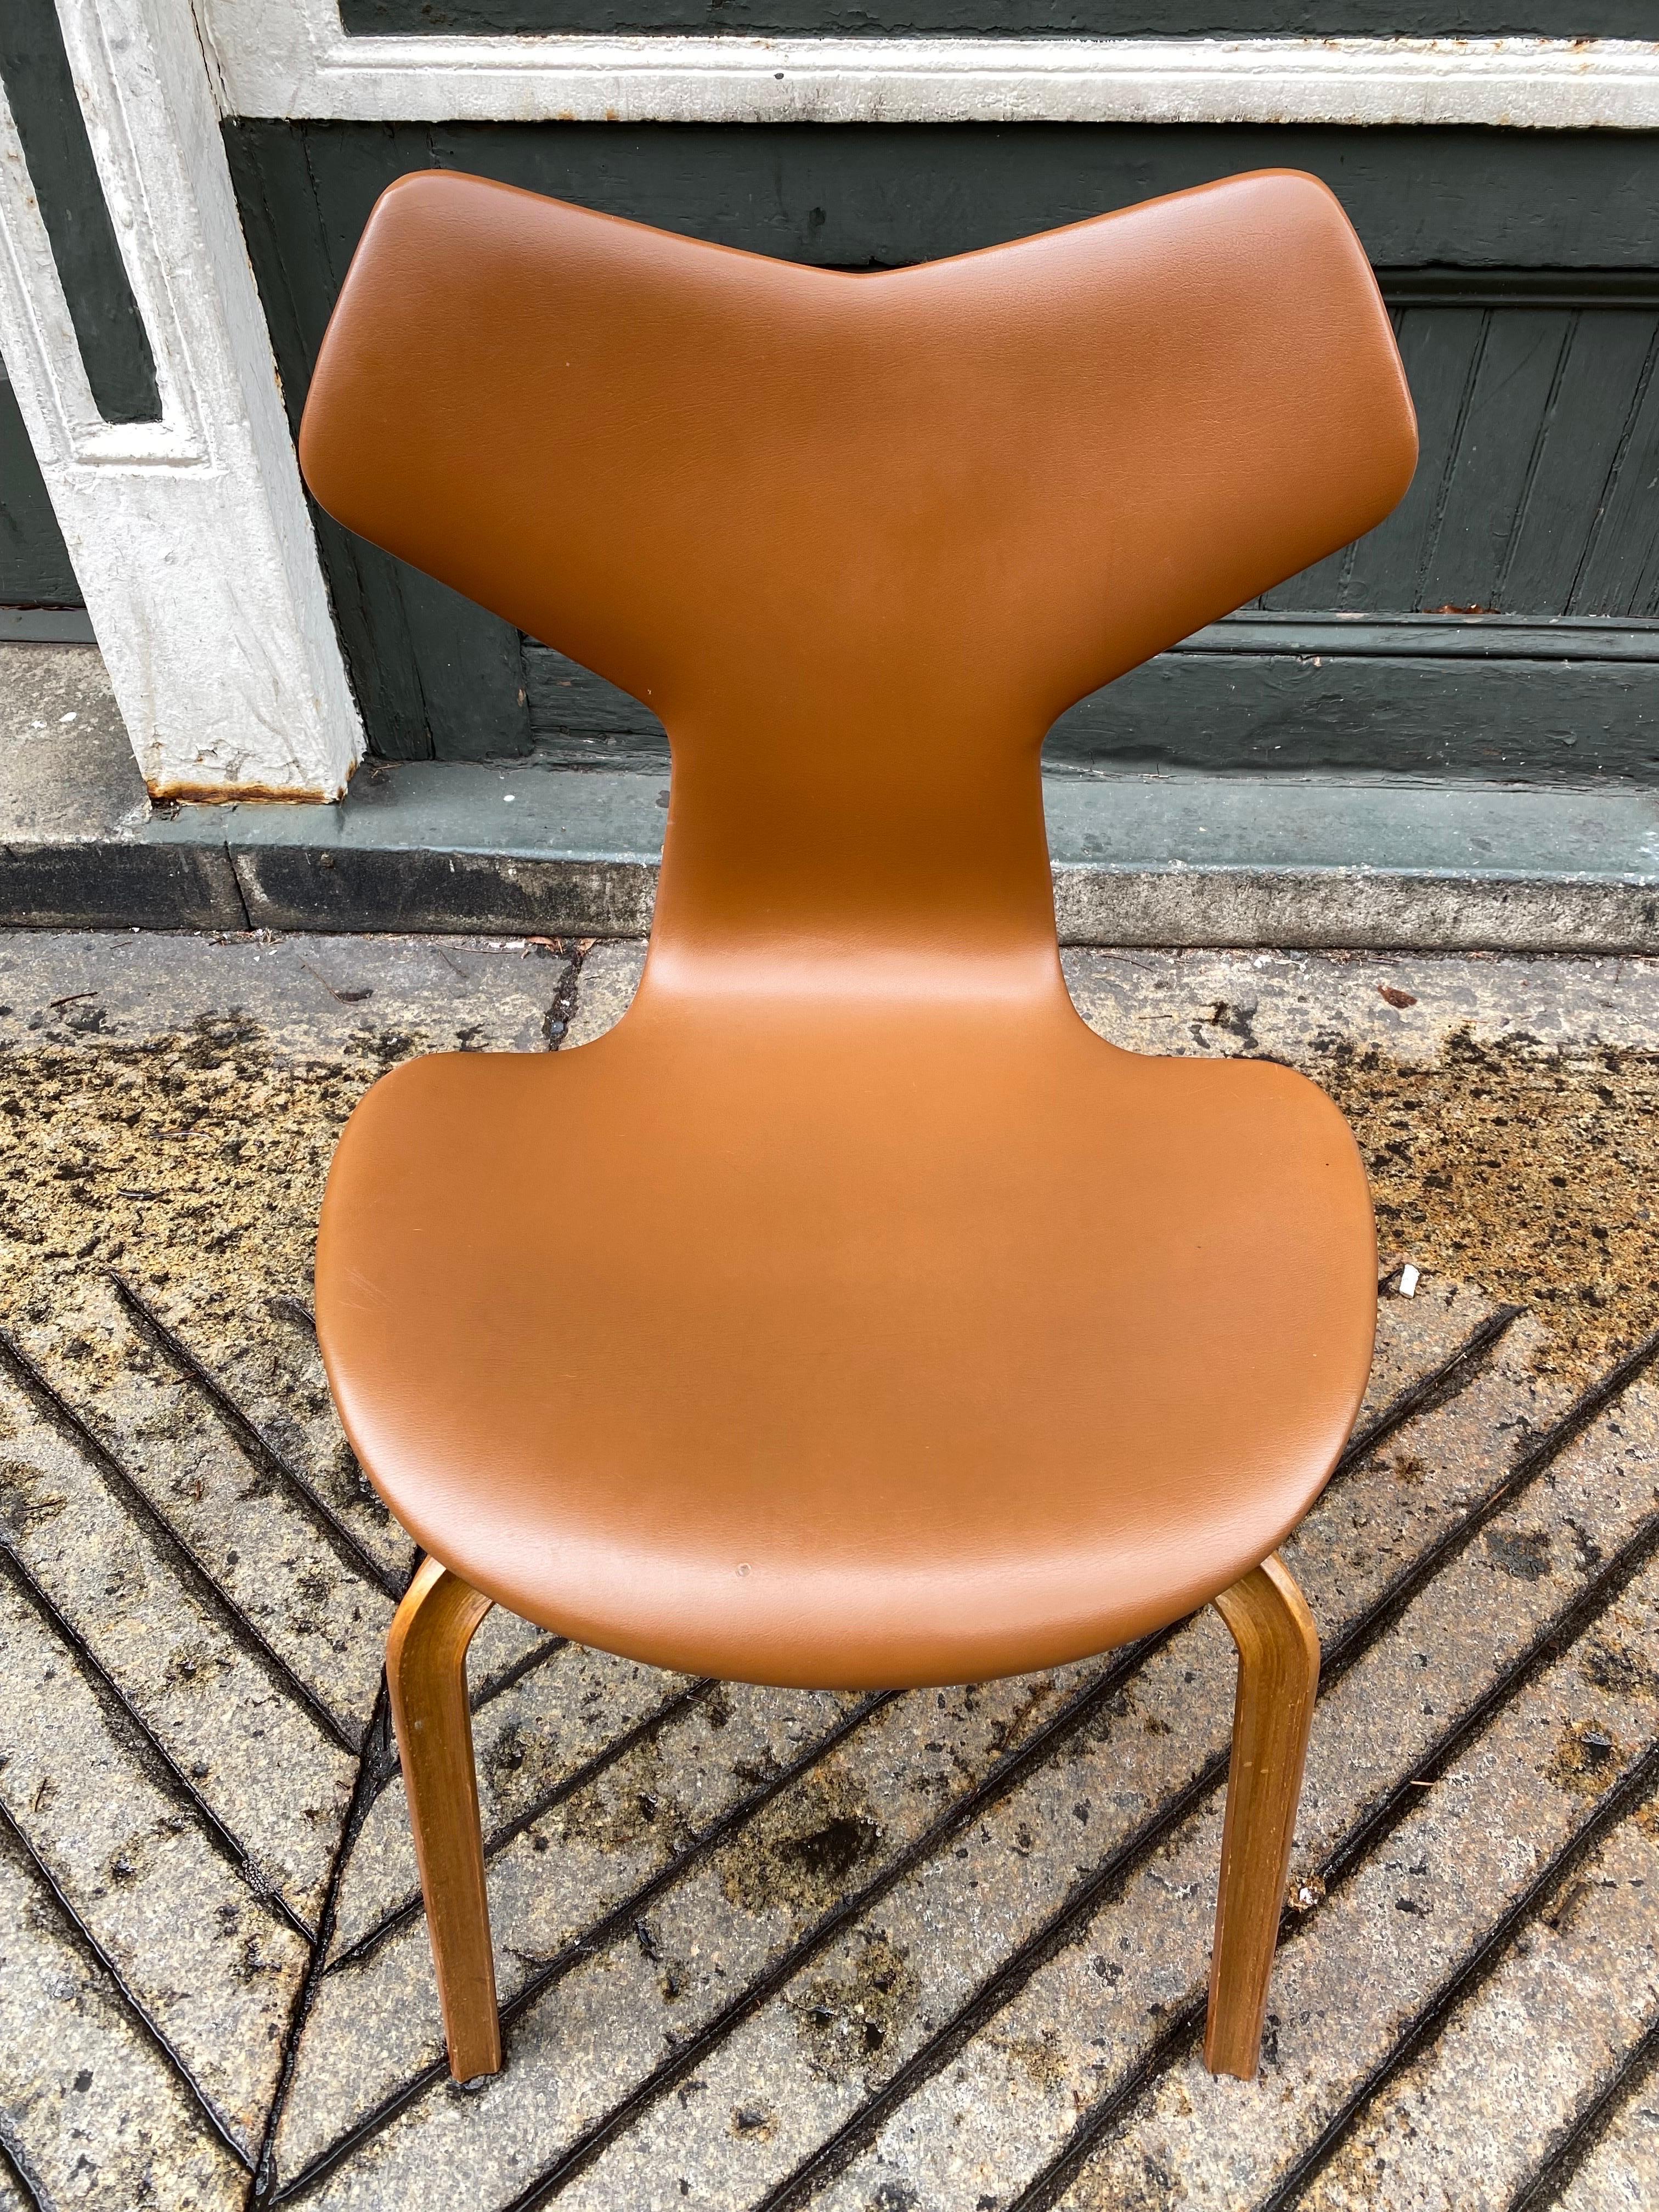 Arne Jacobsen Grand Prix Chair, model 4130. Original vinyl seat cover in very nice shape. Pretty clean example, spine in good shape! Solid Chair perfect to use at a desk or extra occasion chair. Chair seat can be taken off base for easy shipping!